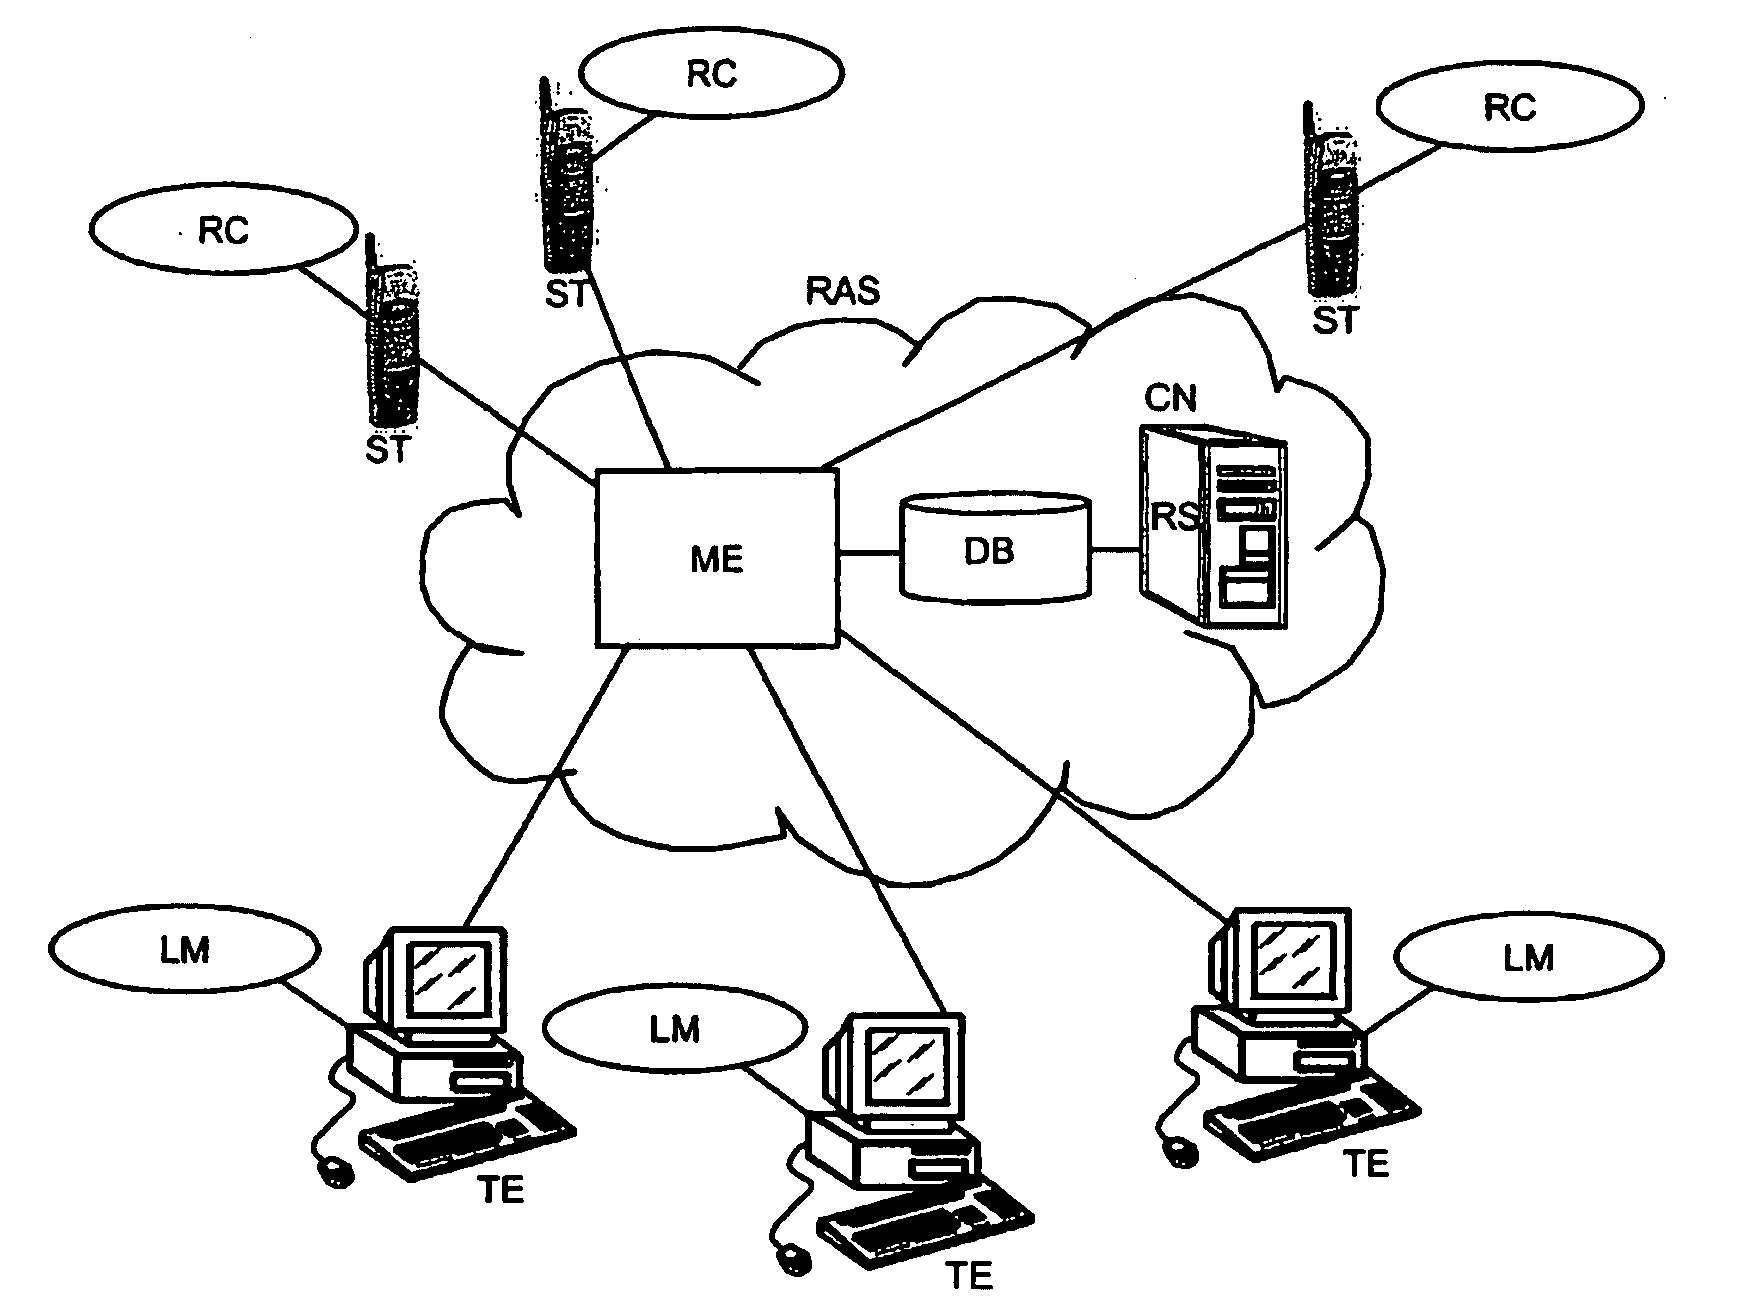 Remote Access System and Method for Enabling a User to Remotely Access Terminal Equipment from a Subscriber Terminal